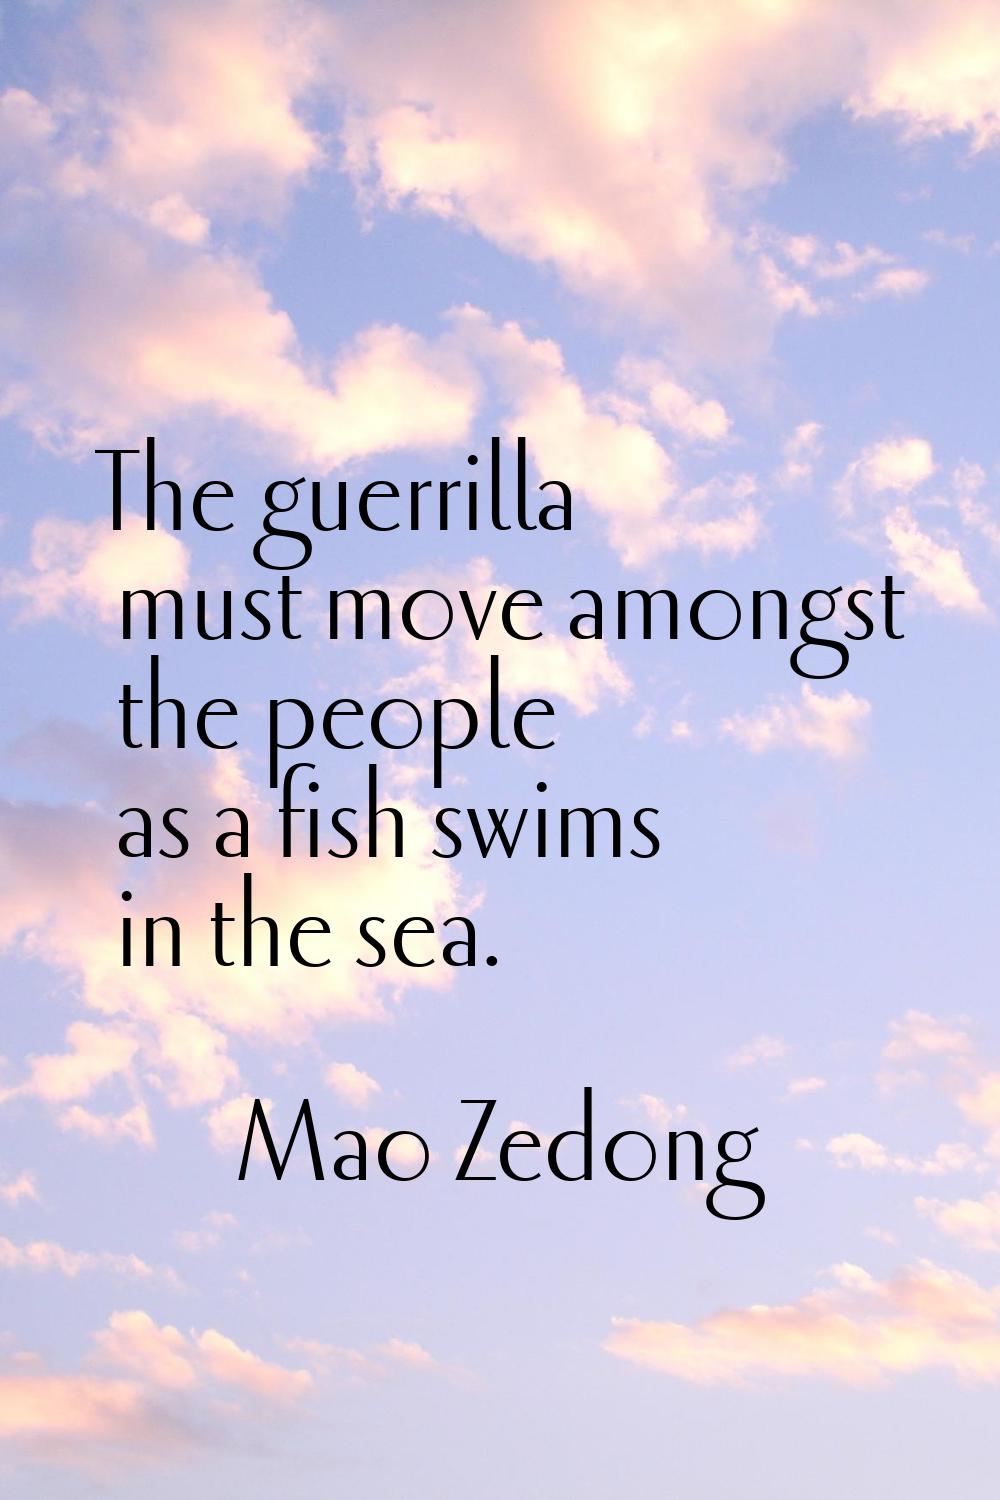 The guerrilla must move amongst the people as a fish swims in the sea.